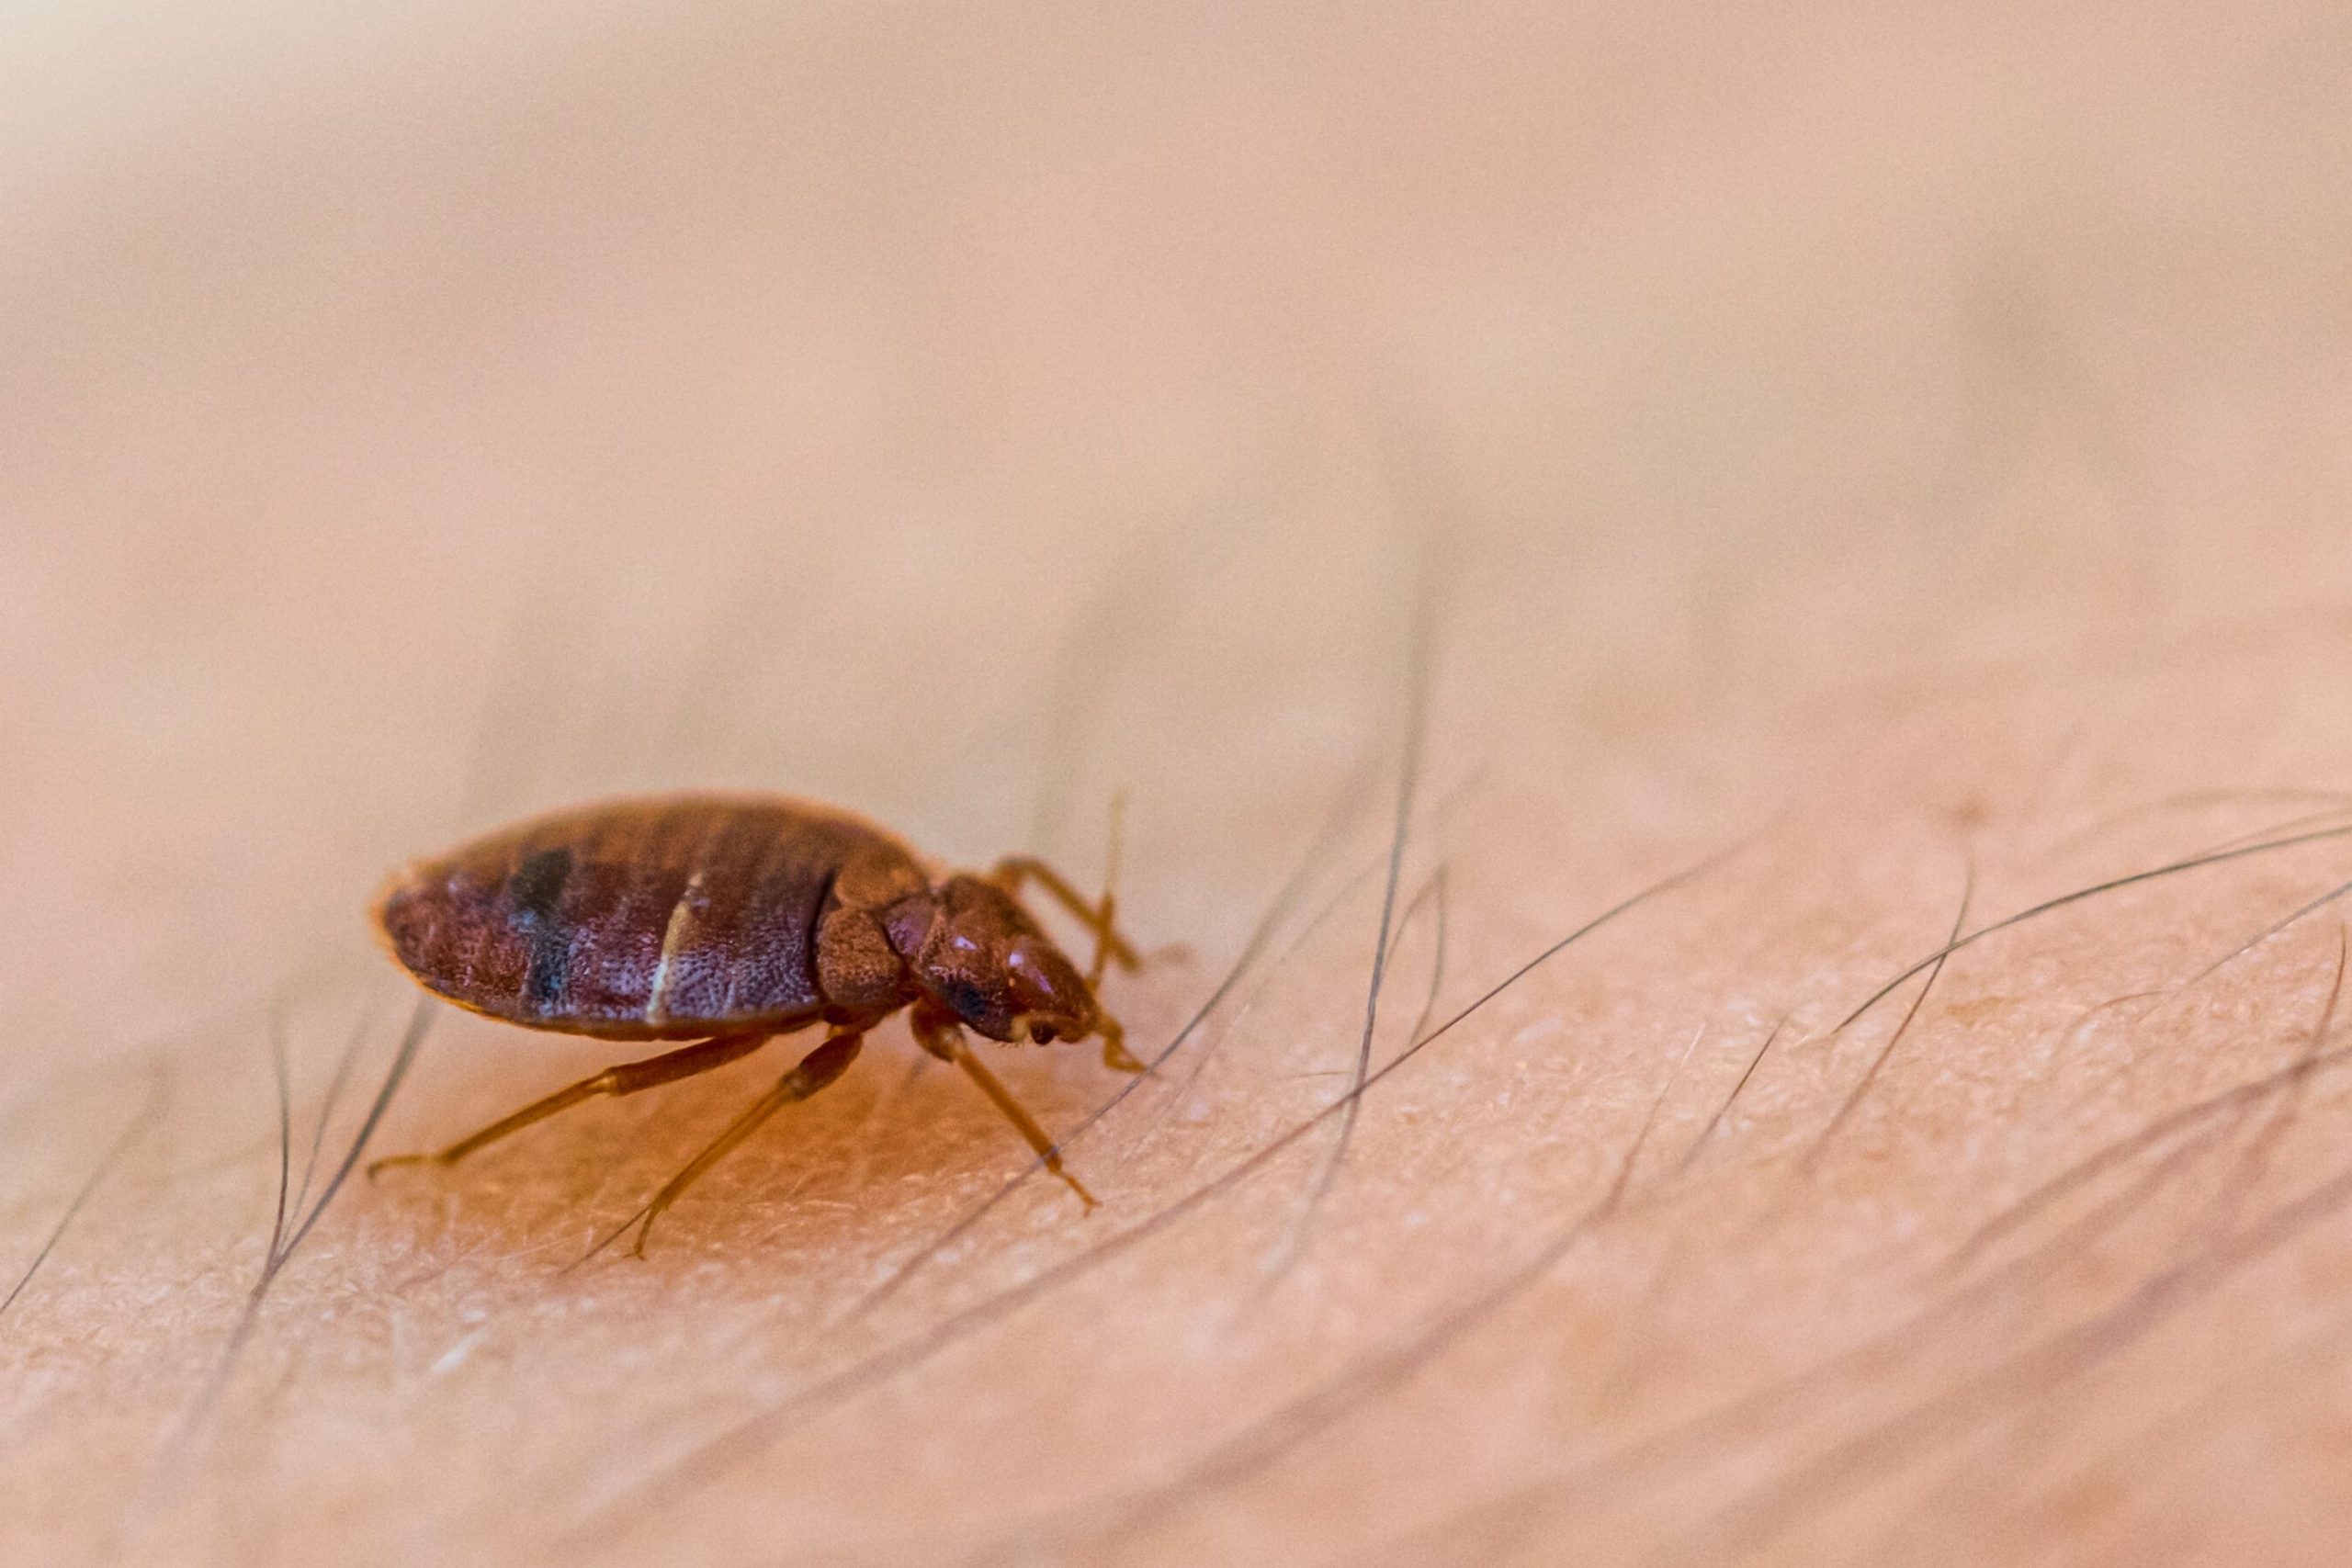 What Shall You Do to Prevent Bed Bugs From Biting You